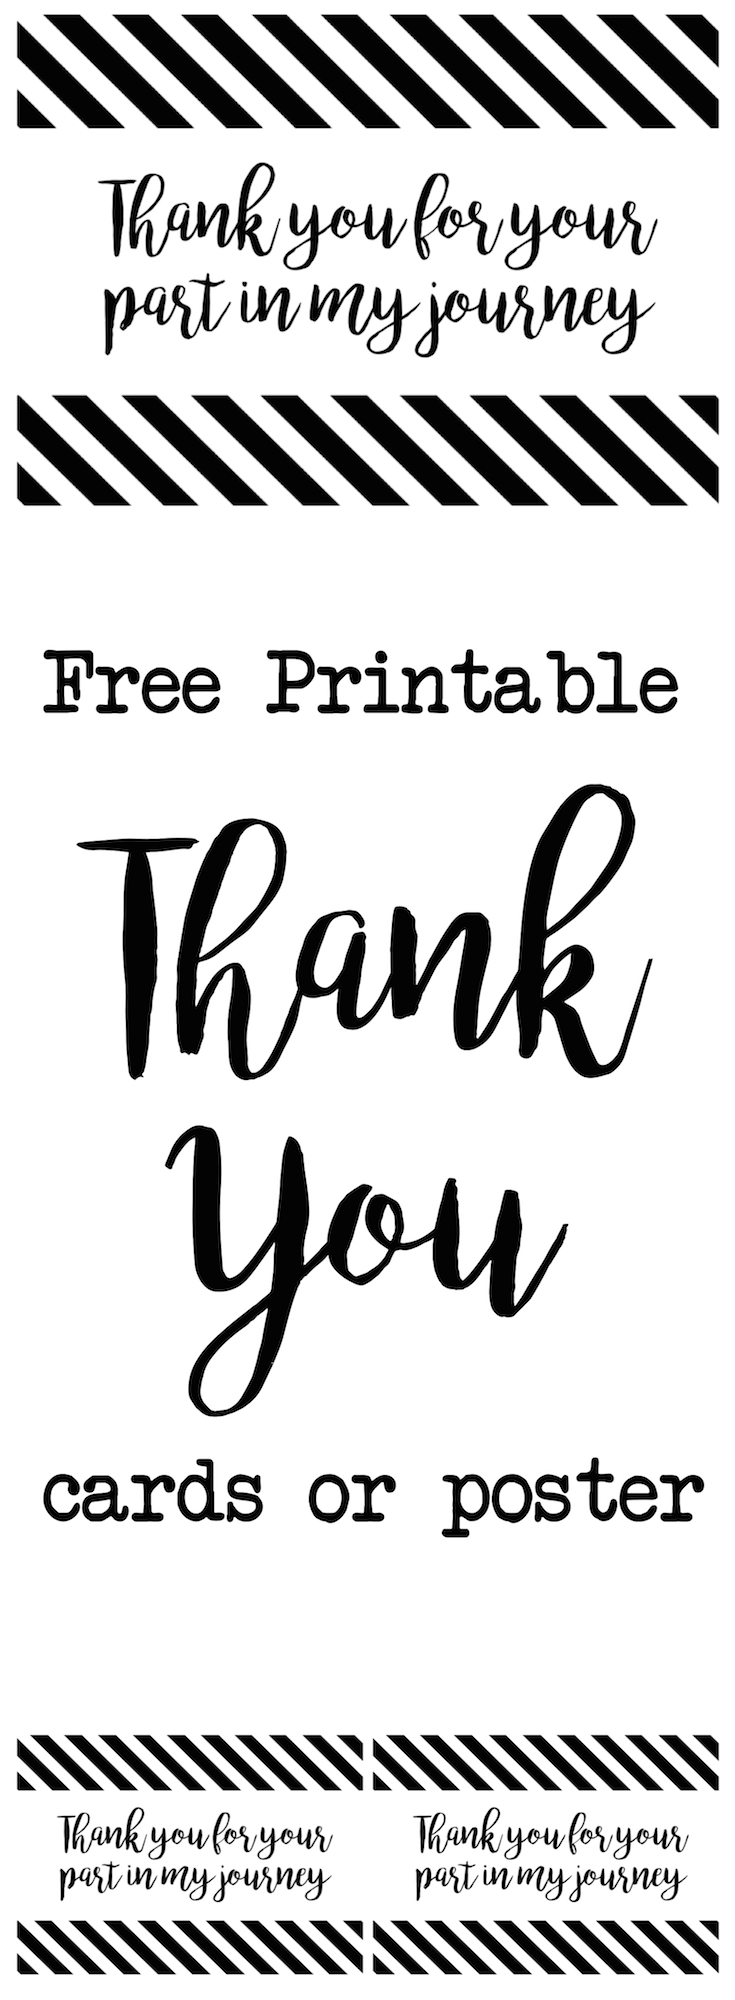 Thank You cards or poster free printable. Thank you for your part in my journey. Print as a poster for a graduation party or as thank you cards to give to all of your teachers and friends who had a profound effect on you.